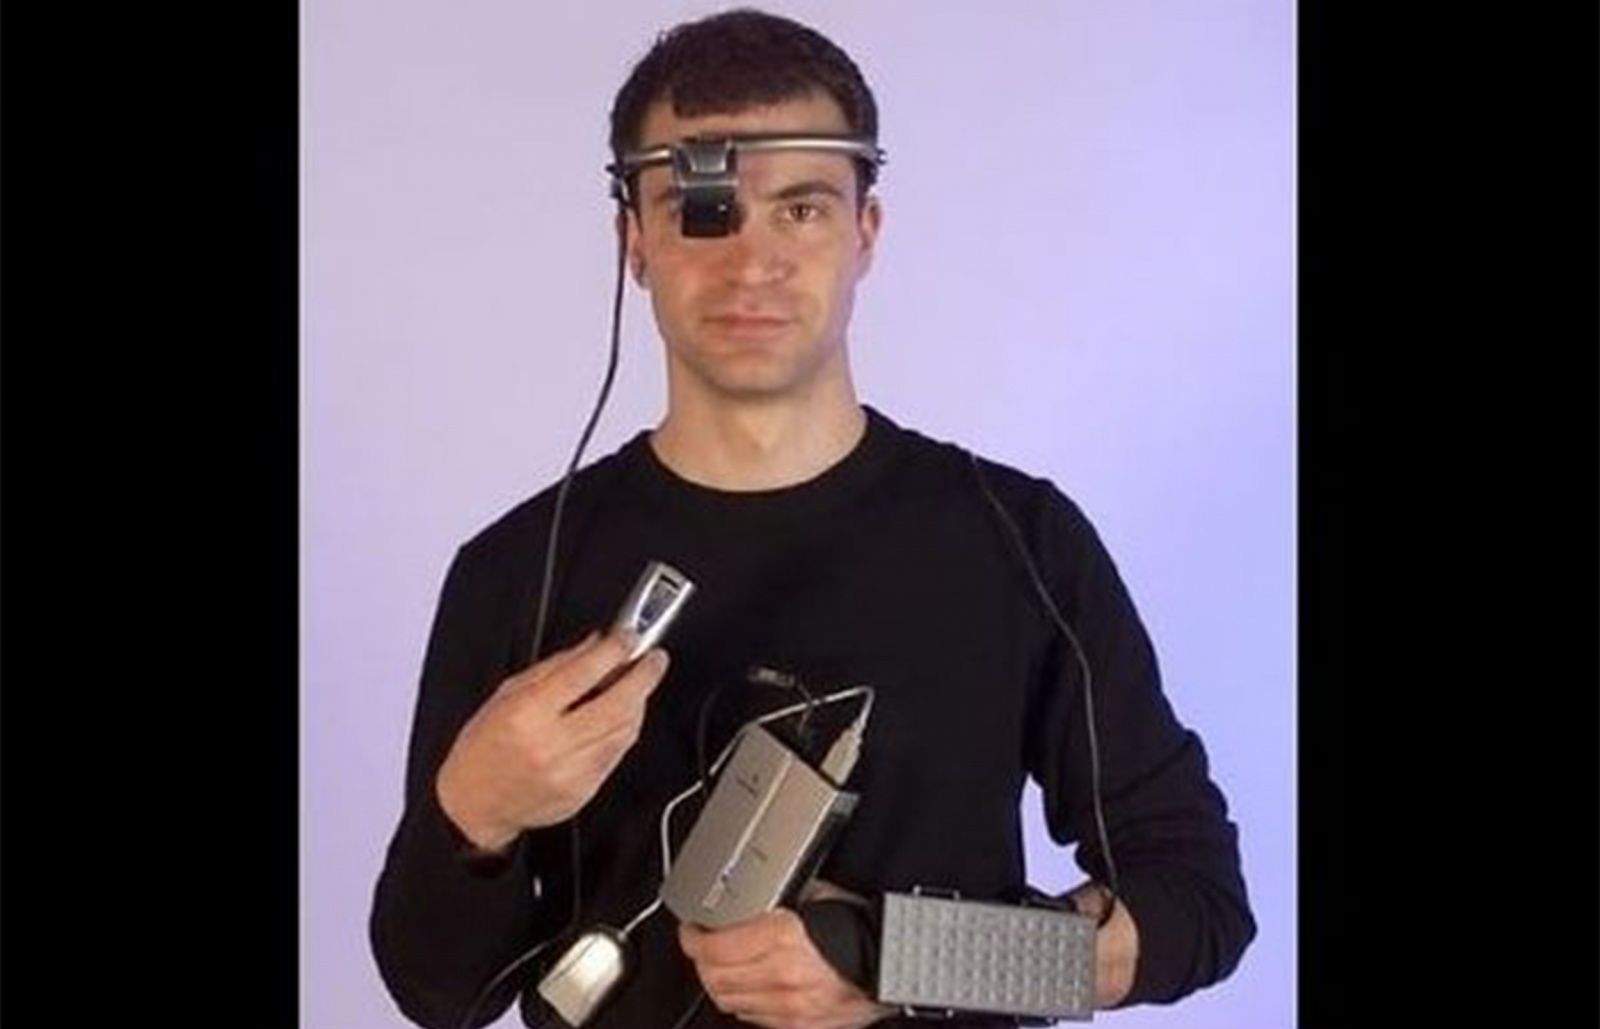 The Xybernaut Poma was considered the first wearable computer - and a tech failure.